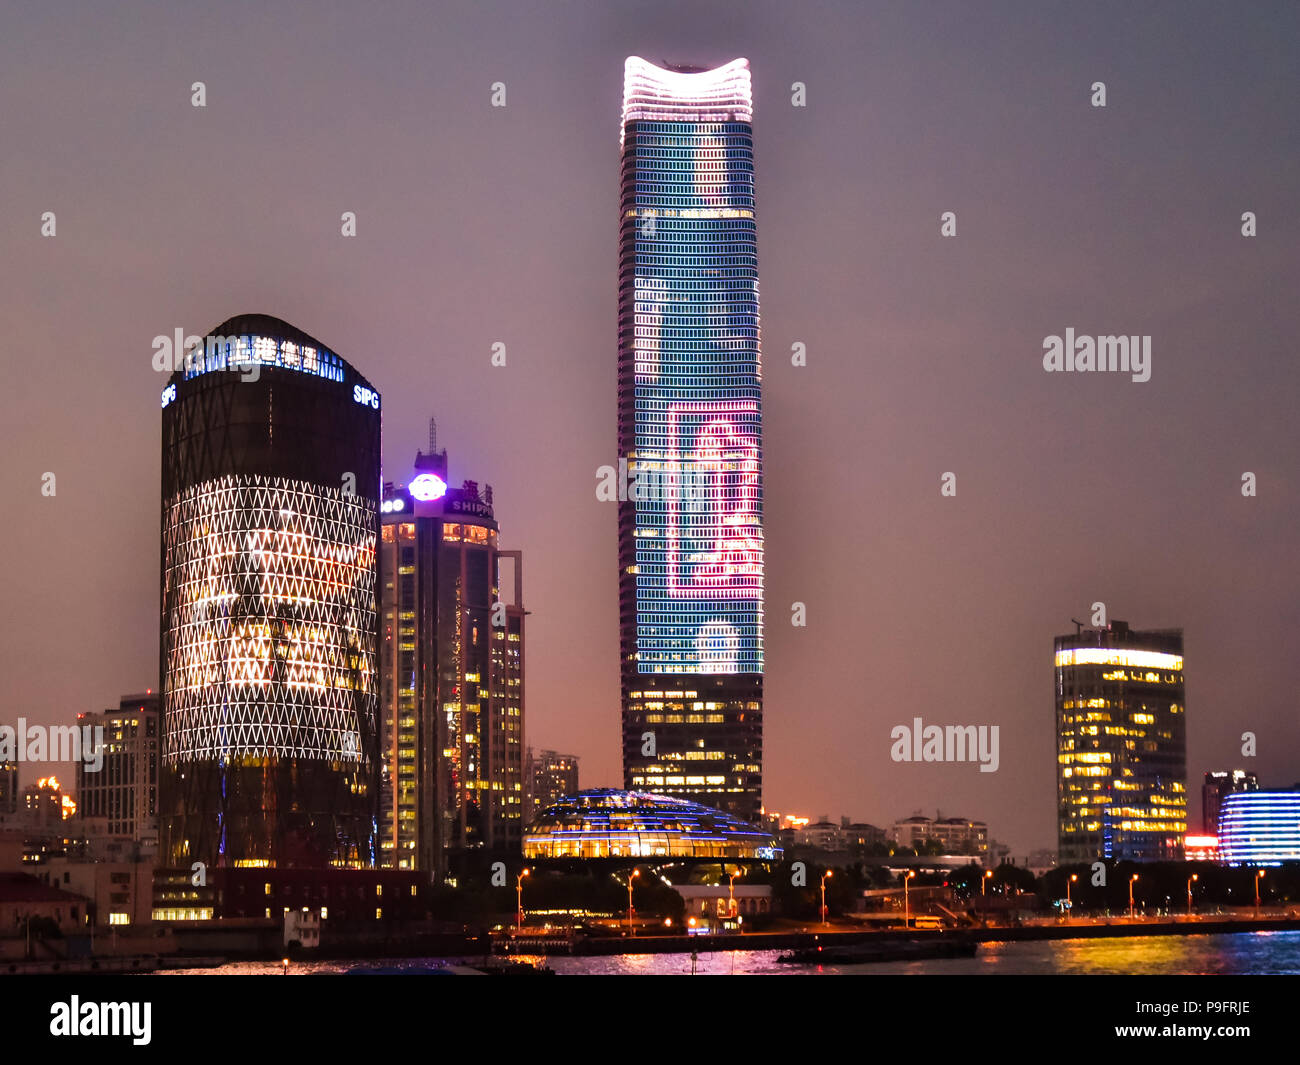 Early evening view of high rises in the new Pudong district of Shanghai, China. Stock Photo